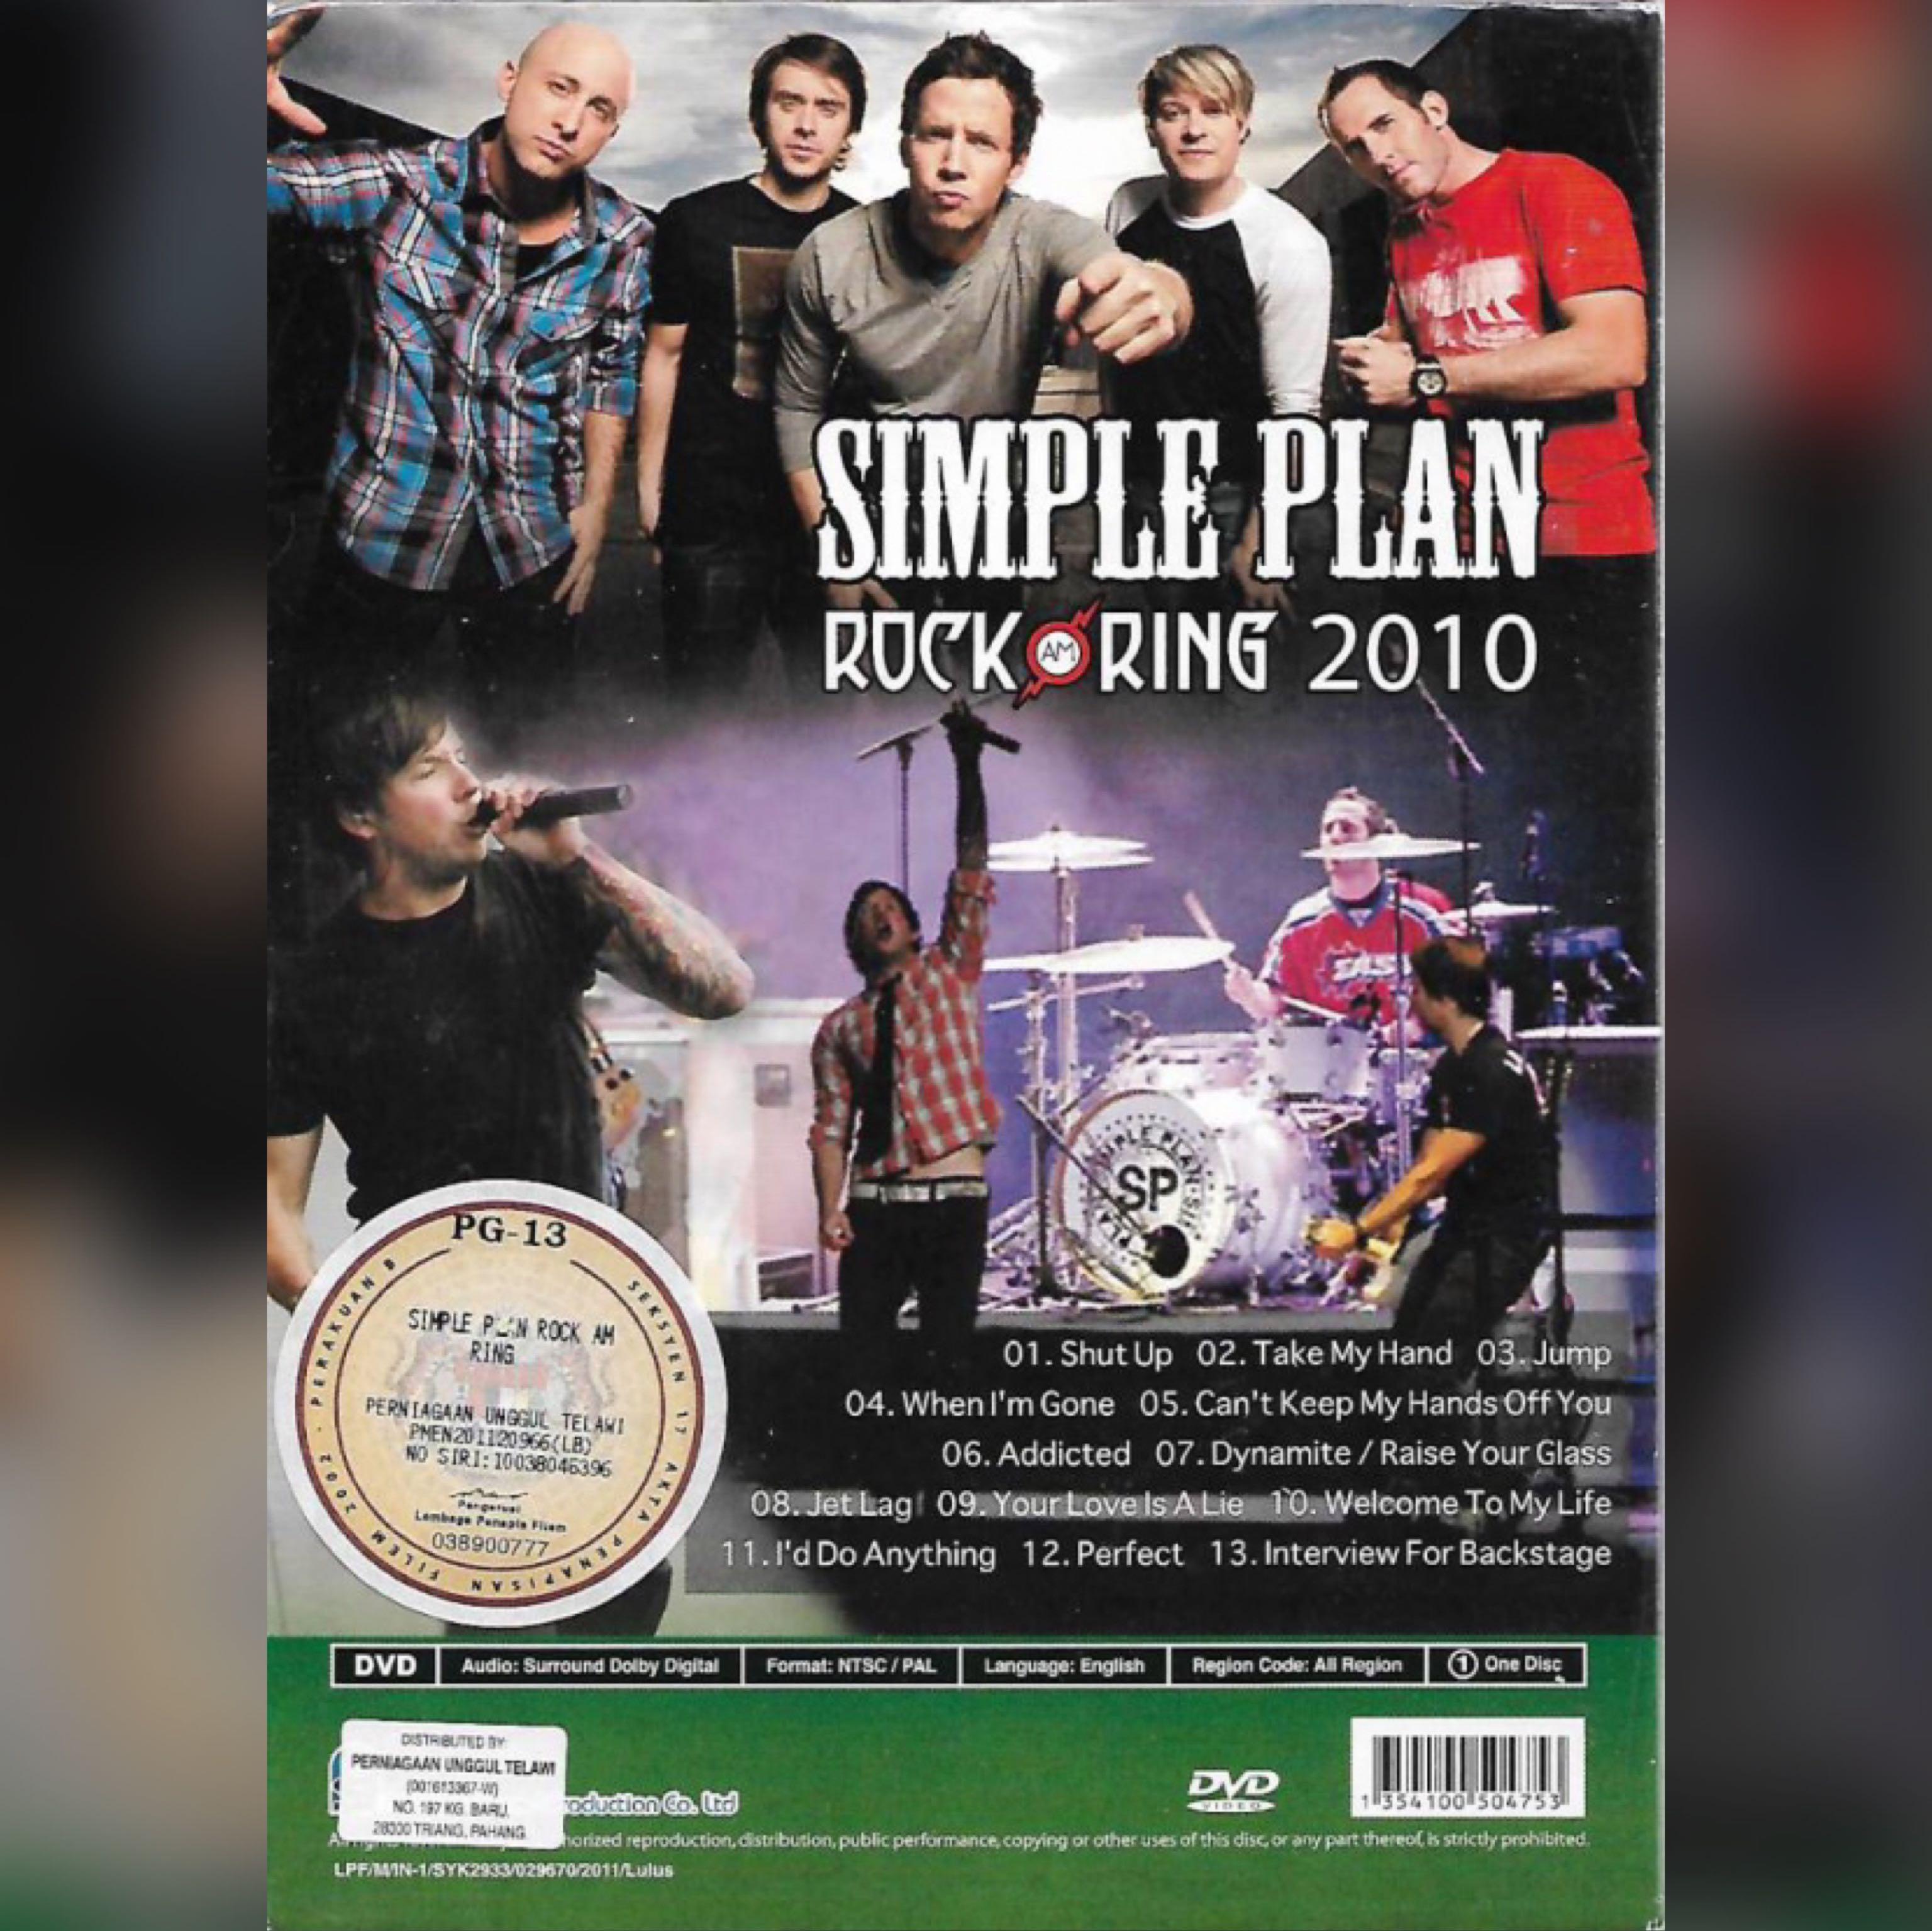 Simple Plan - Your Love Is A Lie [Live] 